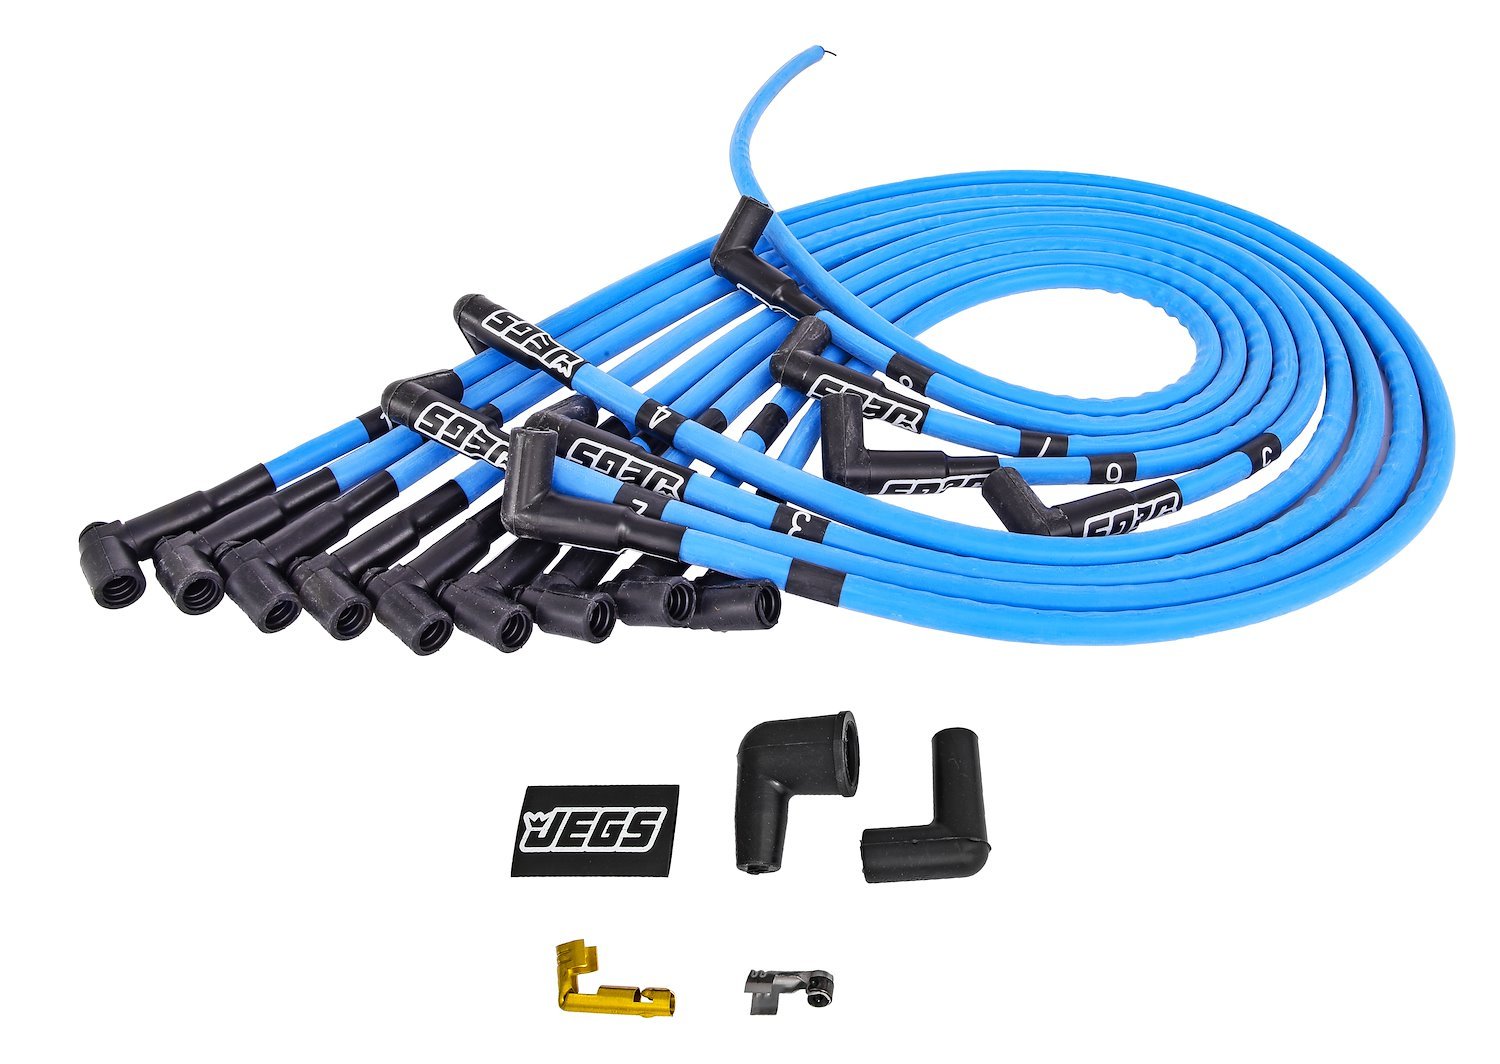 8mm Hi-Temp Sleeved Spark Plug Wire Set for Small Block Chevy 262-400 w/HEI, Over Valve Cover w/90-degree Boots [Blue]